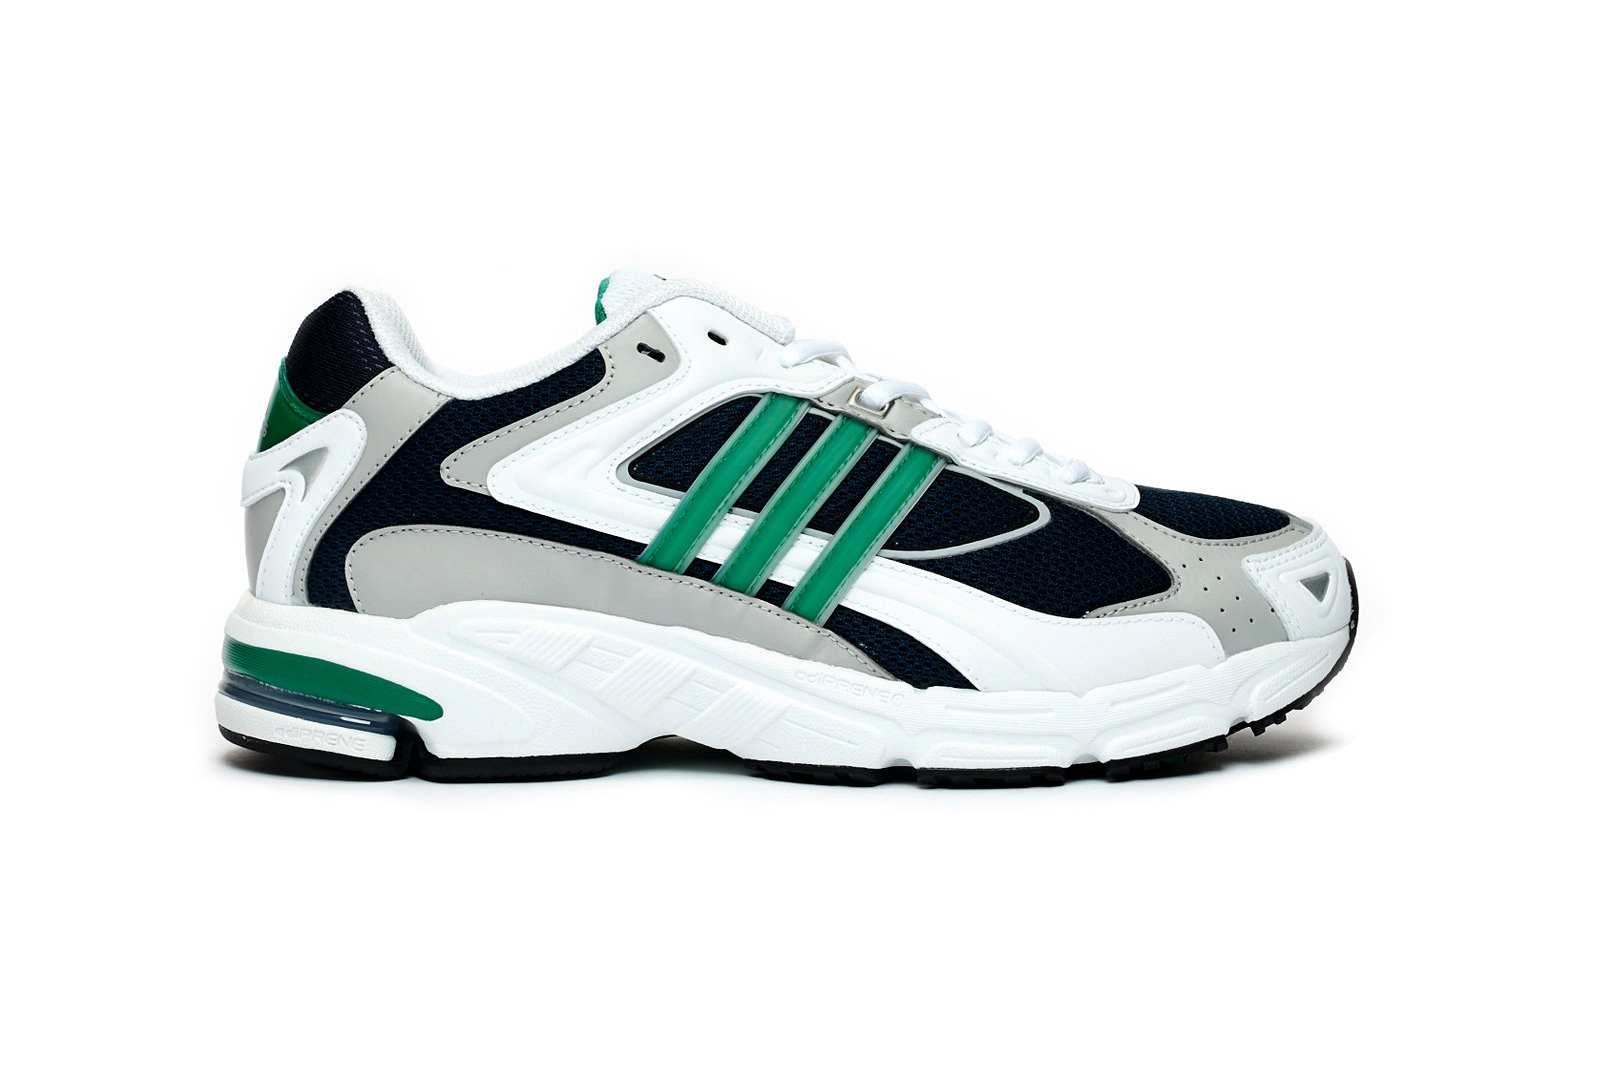 adidas-originals-response-cl-chunky-sneaker-release-information-2000s-fw4440-fw4442-1.jpg